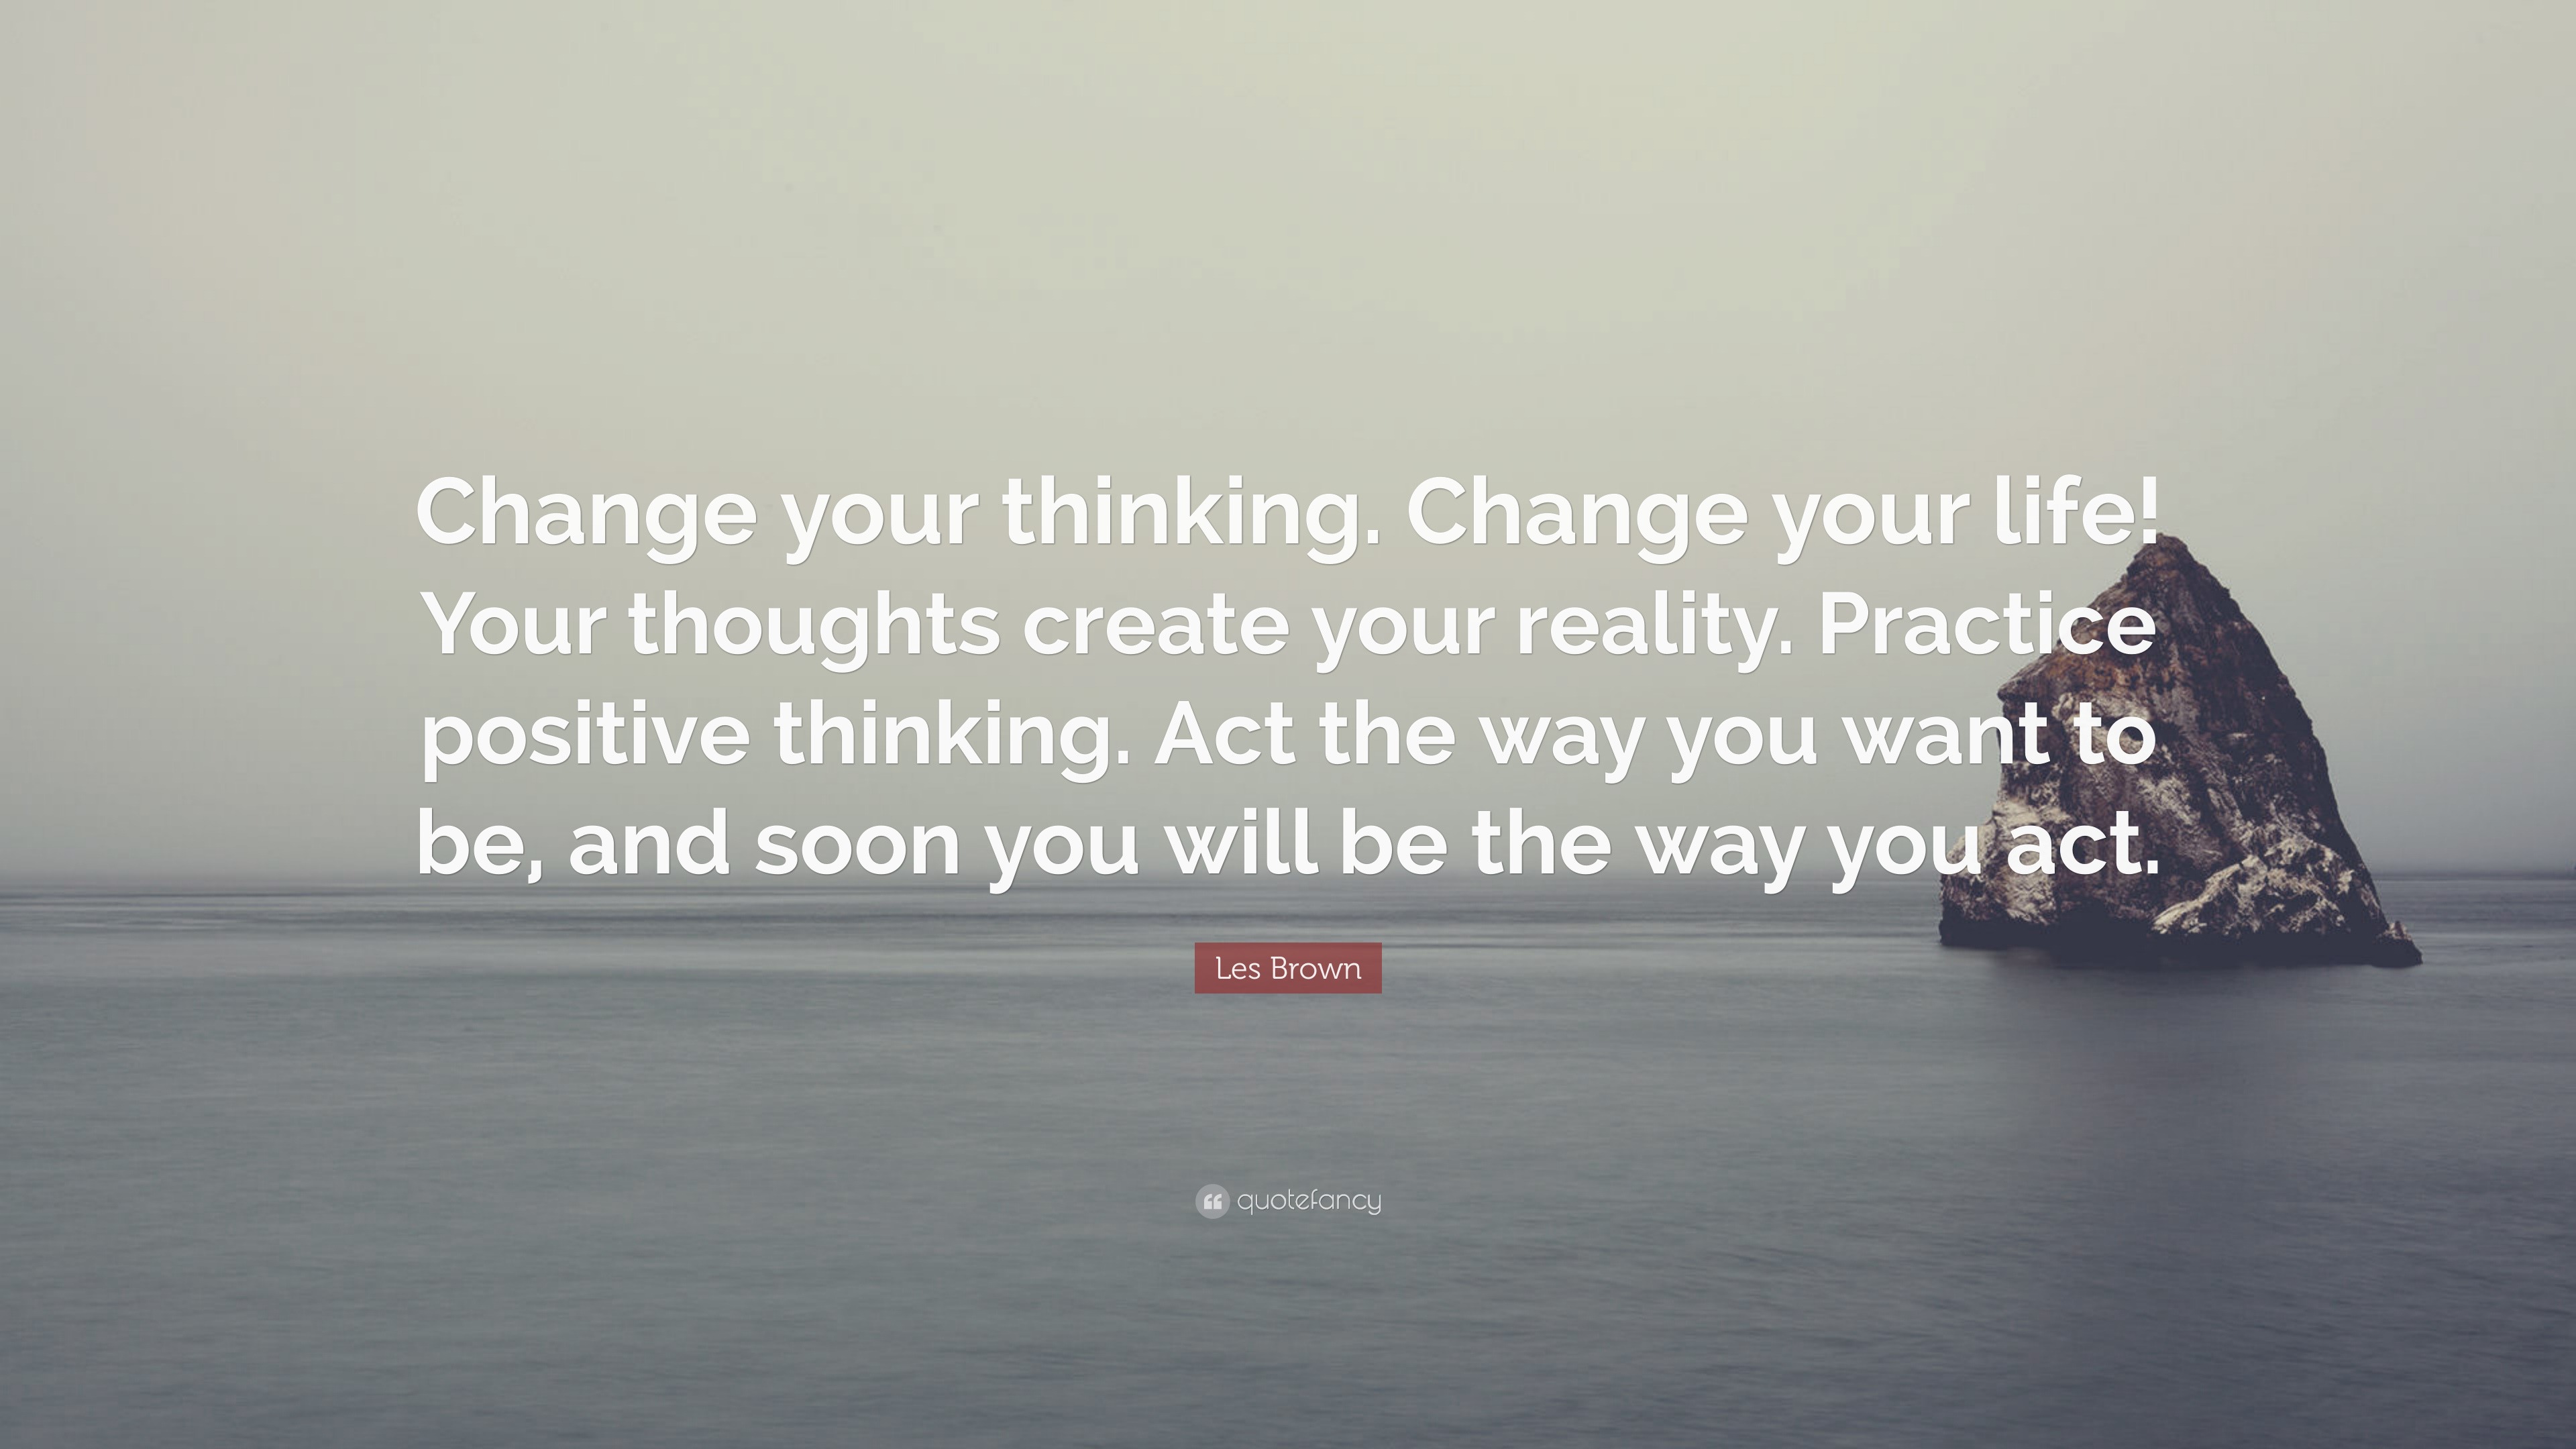 Les Brown Quote: "Change your thinking. Change your life ...